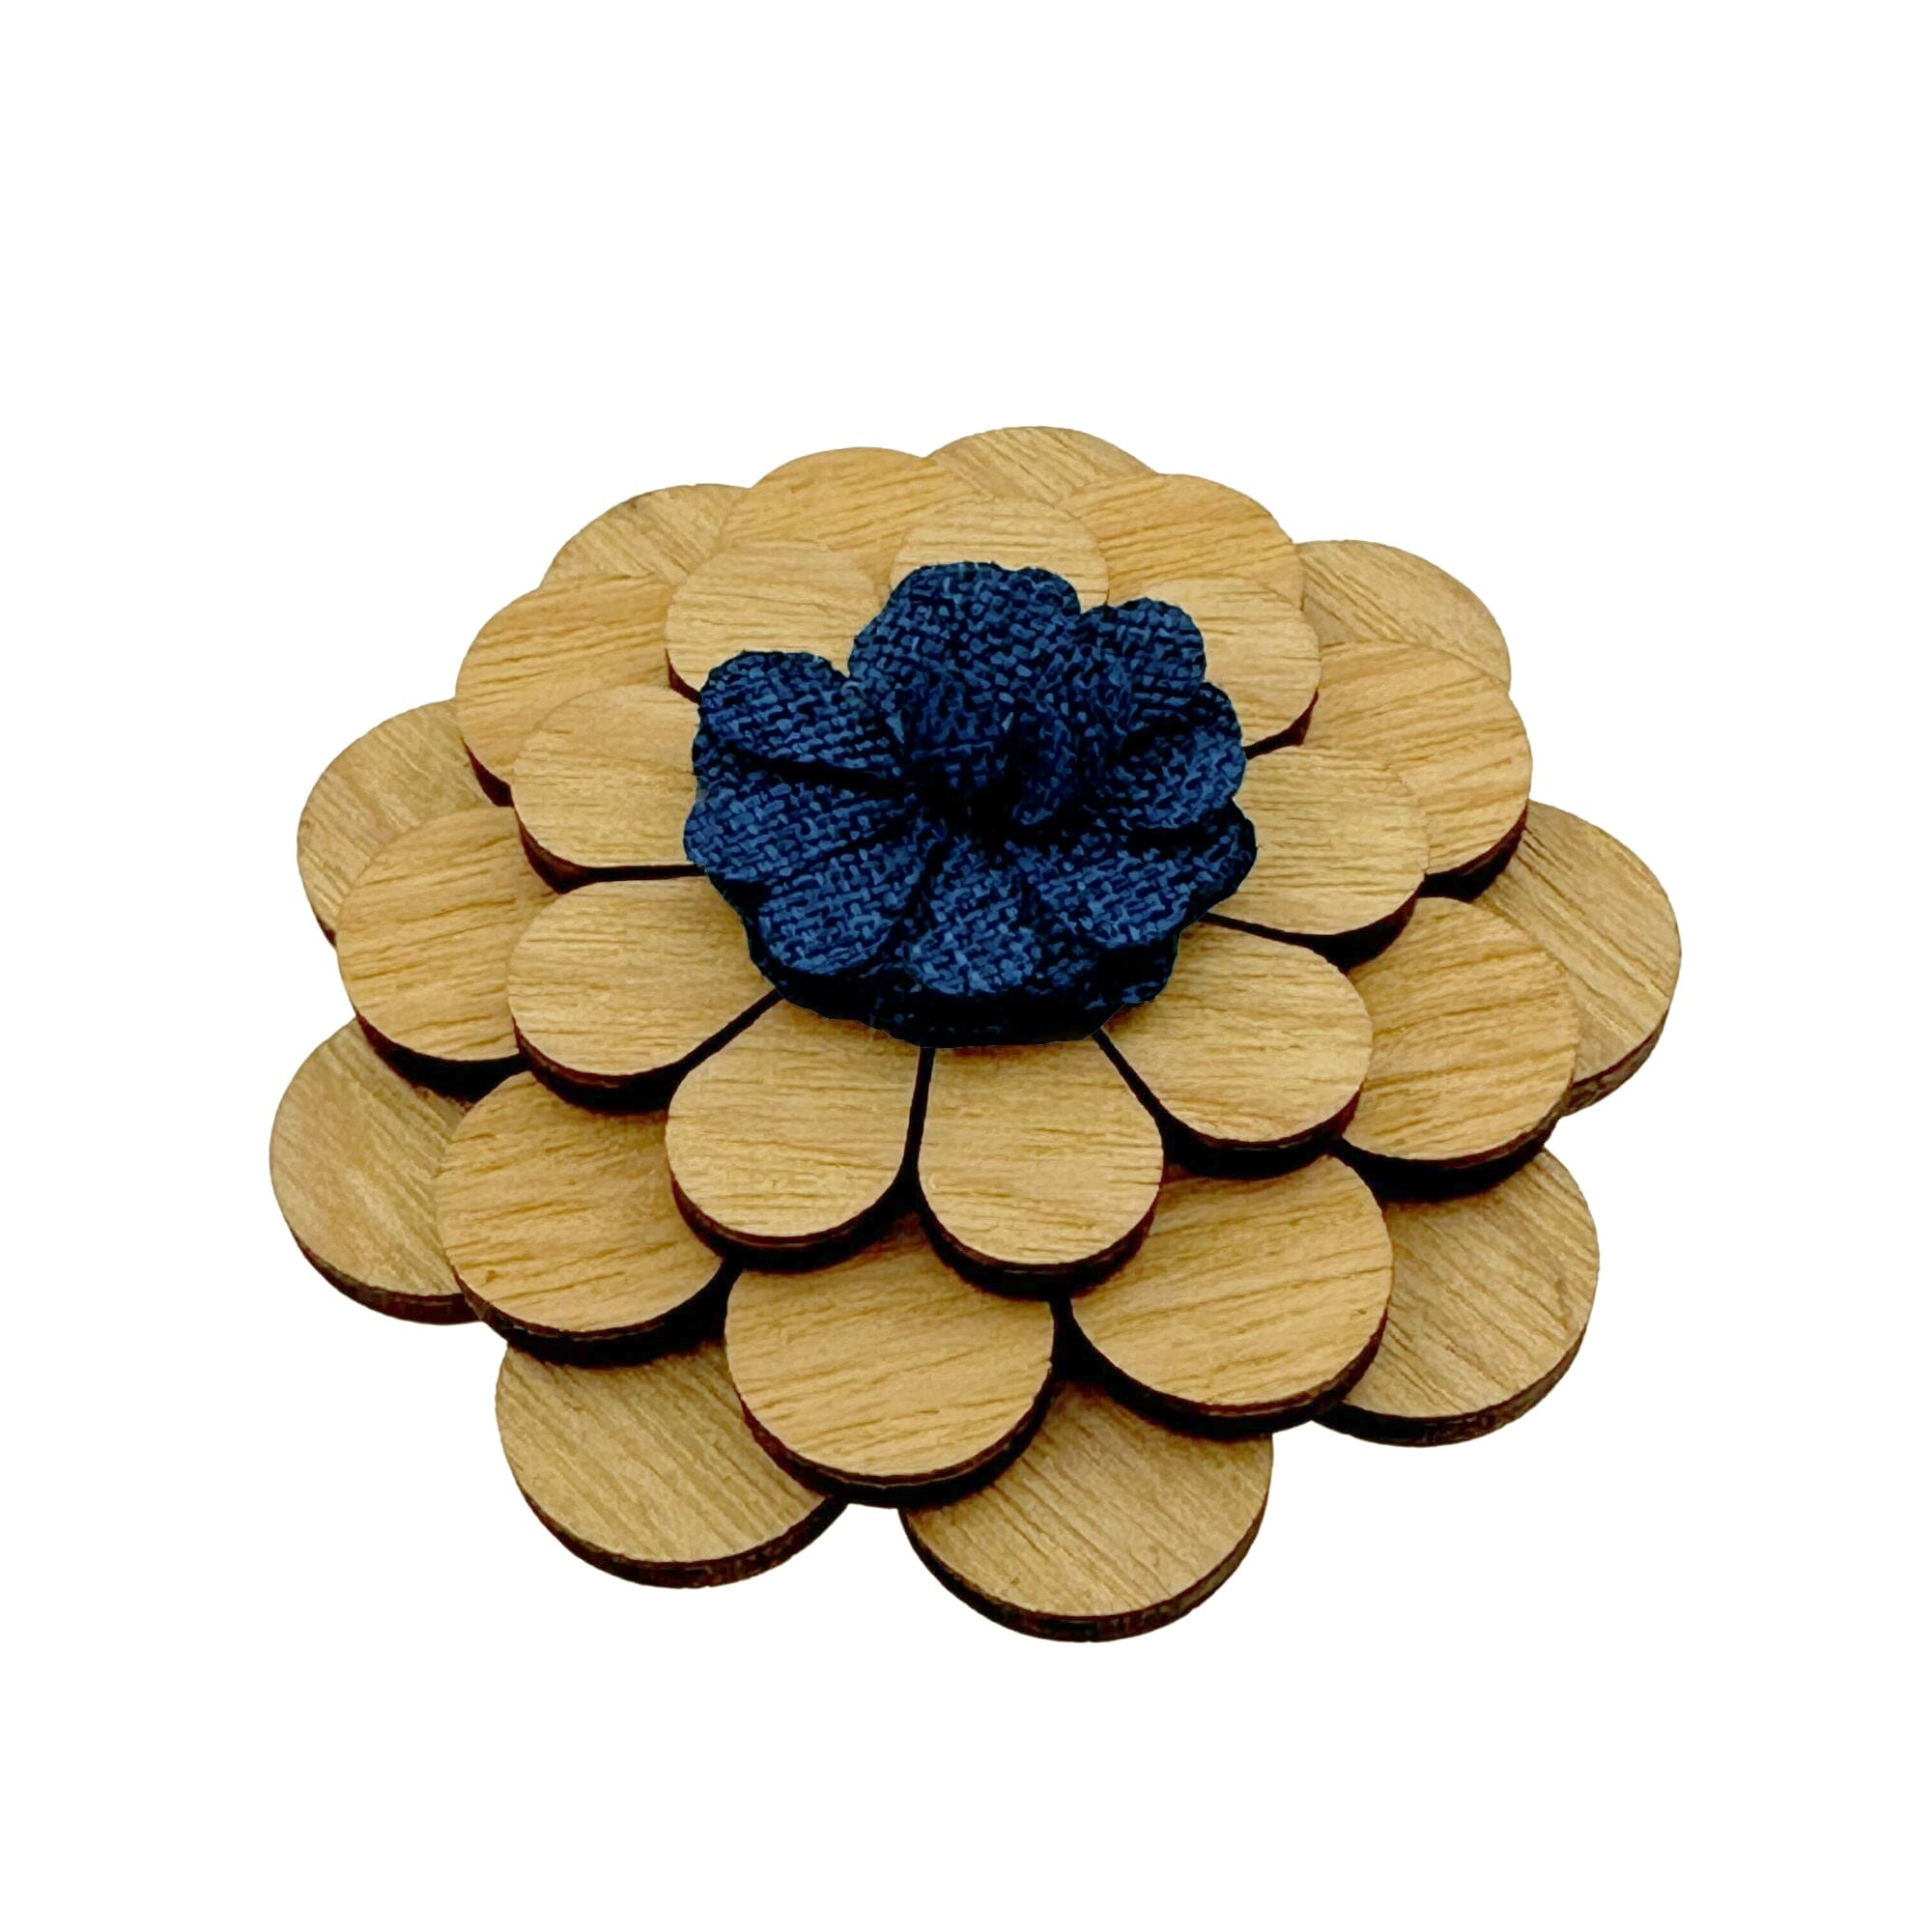 Wooden Flower with Blue Fabric Centre Lapel Pin Lapel Pin Clinks 